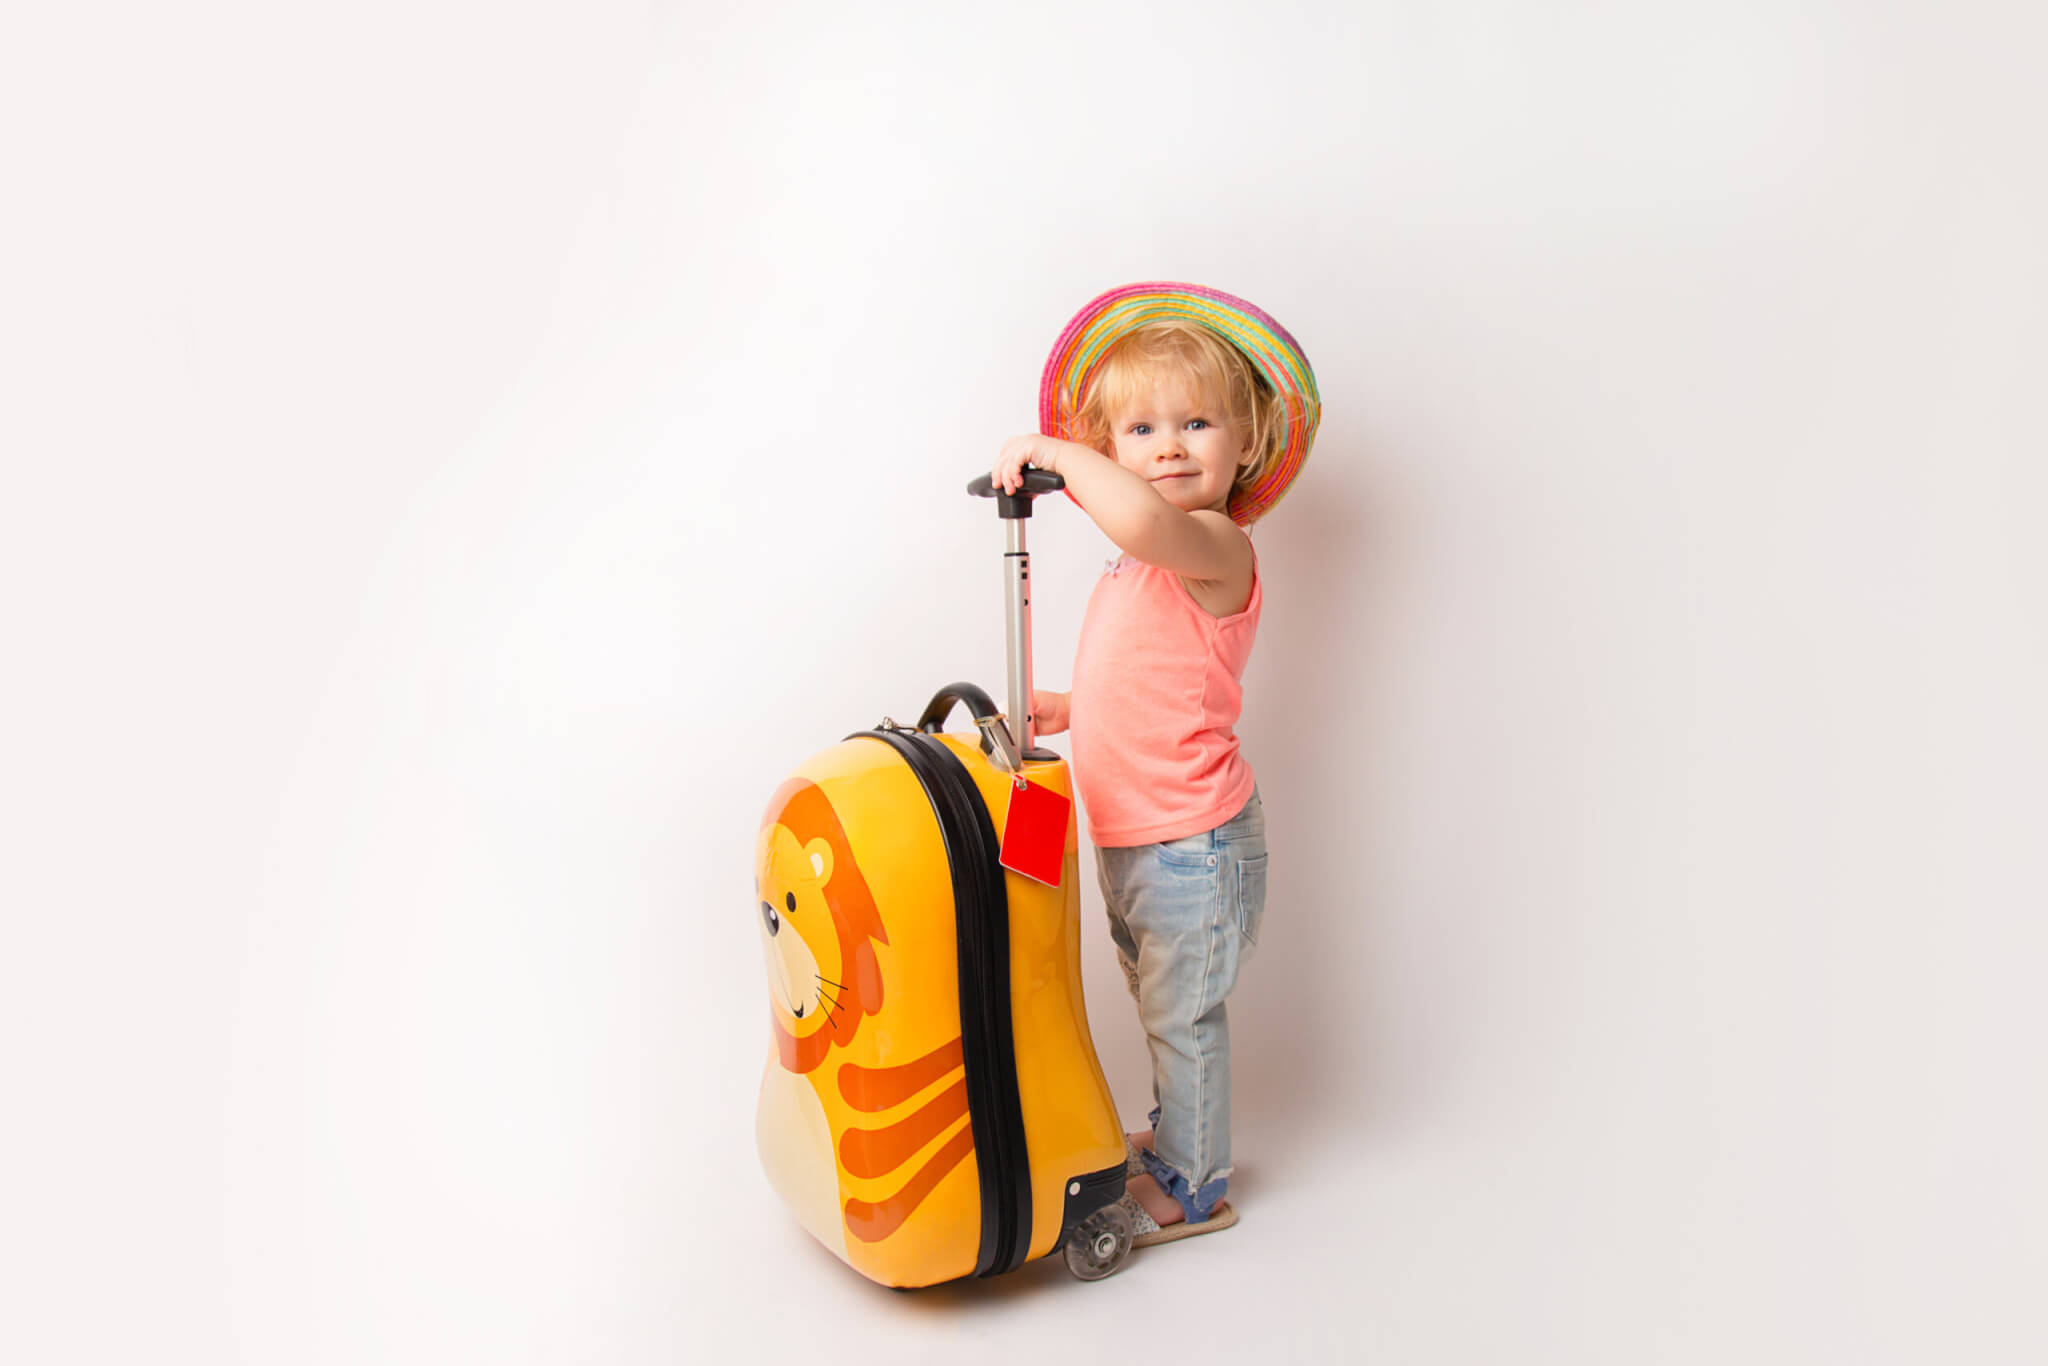 Young-child-carrying-kids-luggage-scaled.jpg